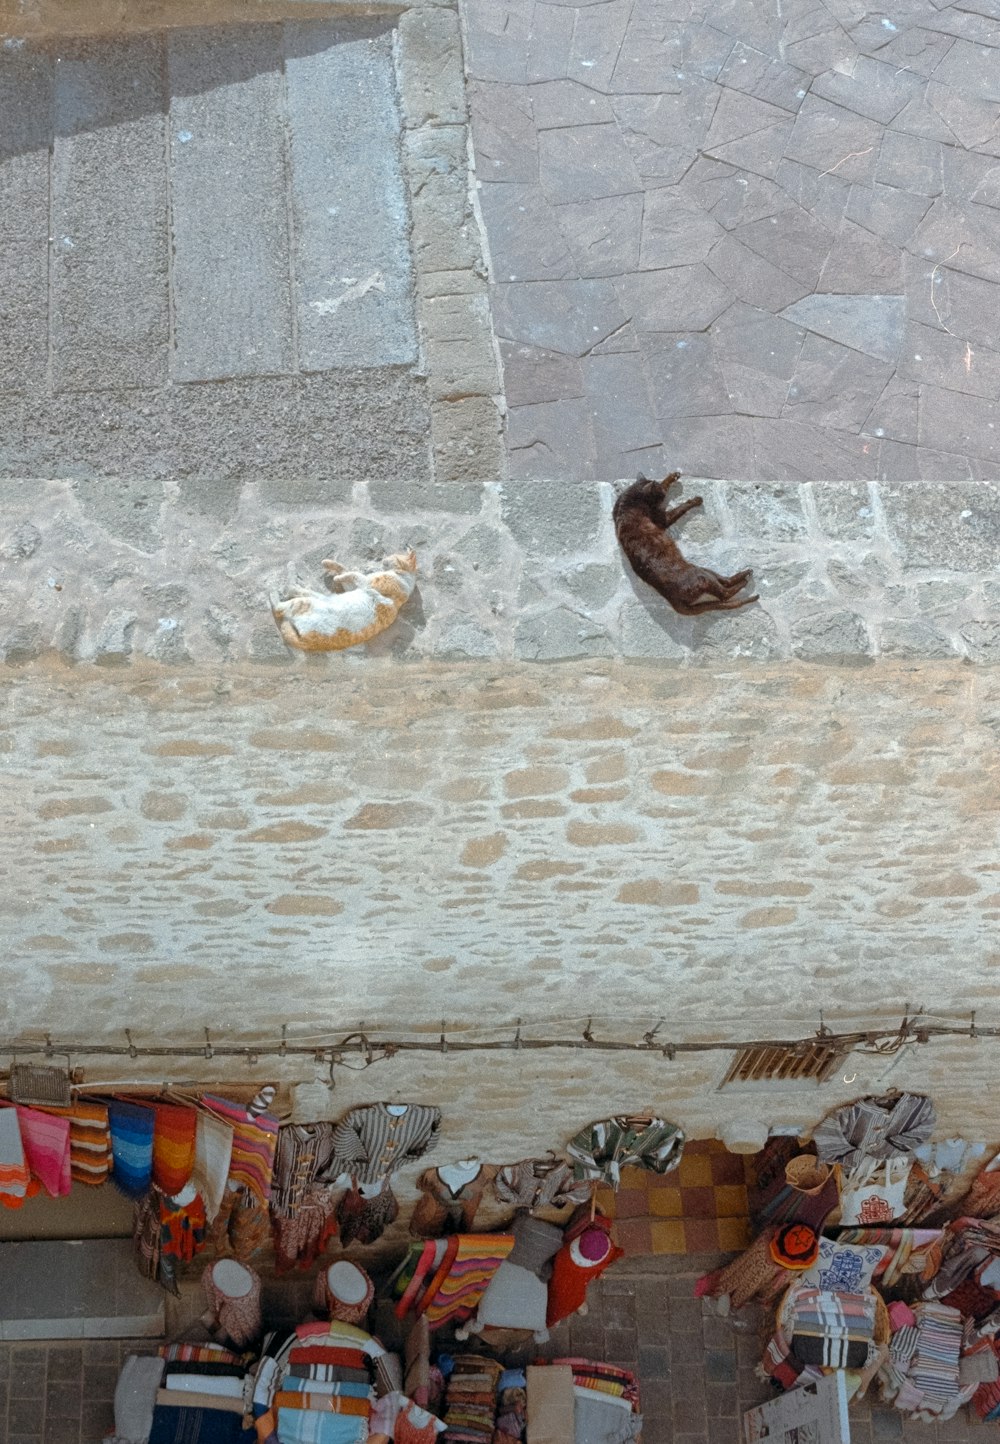 a group of people lying on the ground next to a wall with clothes